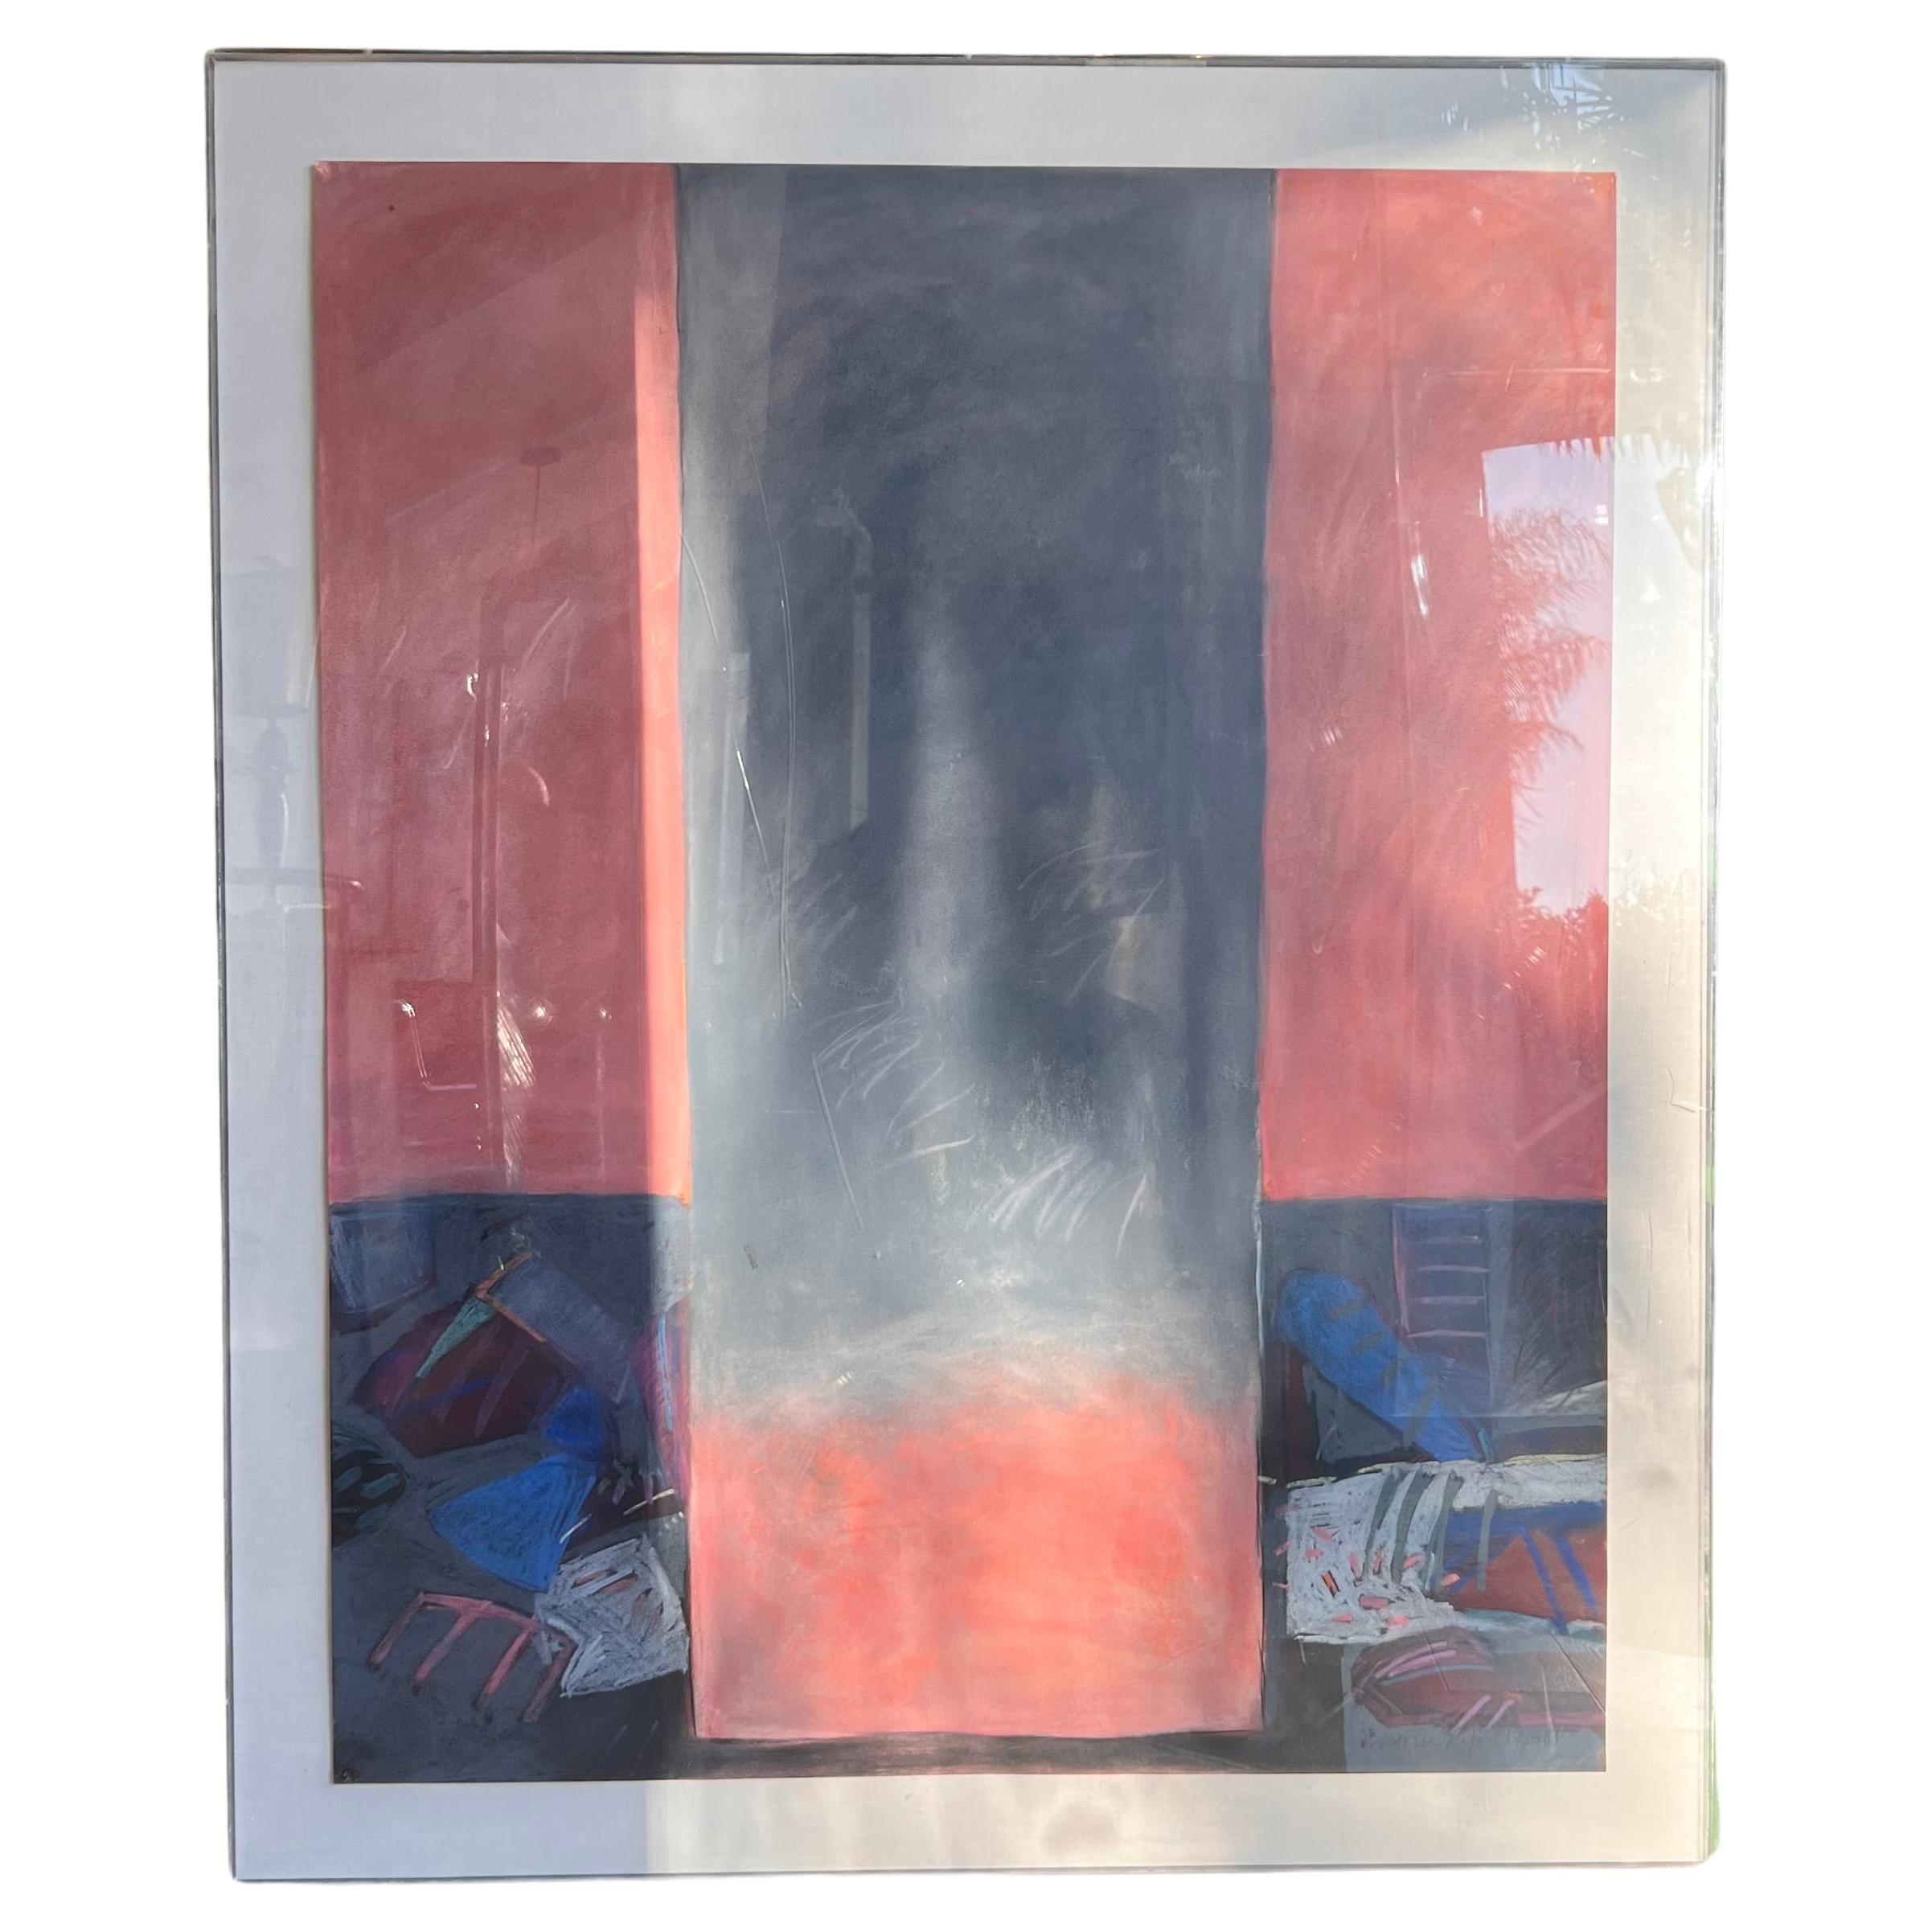 A large work on paper by Victoria Ryan, signed and dated lower right, 1985. Color pastel in tones of peony and cobalt and framed in a large lucite box which exhibits some - albeit minor - signs of age to the surface. Overall fabulous condition. Pick